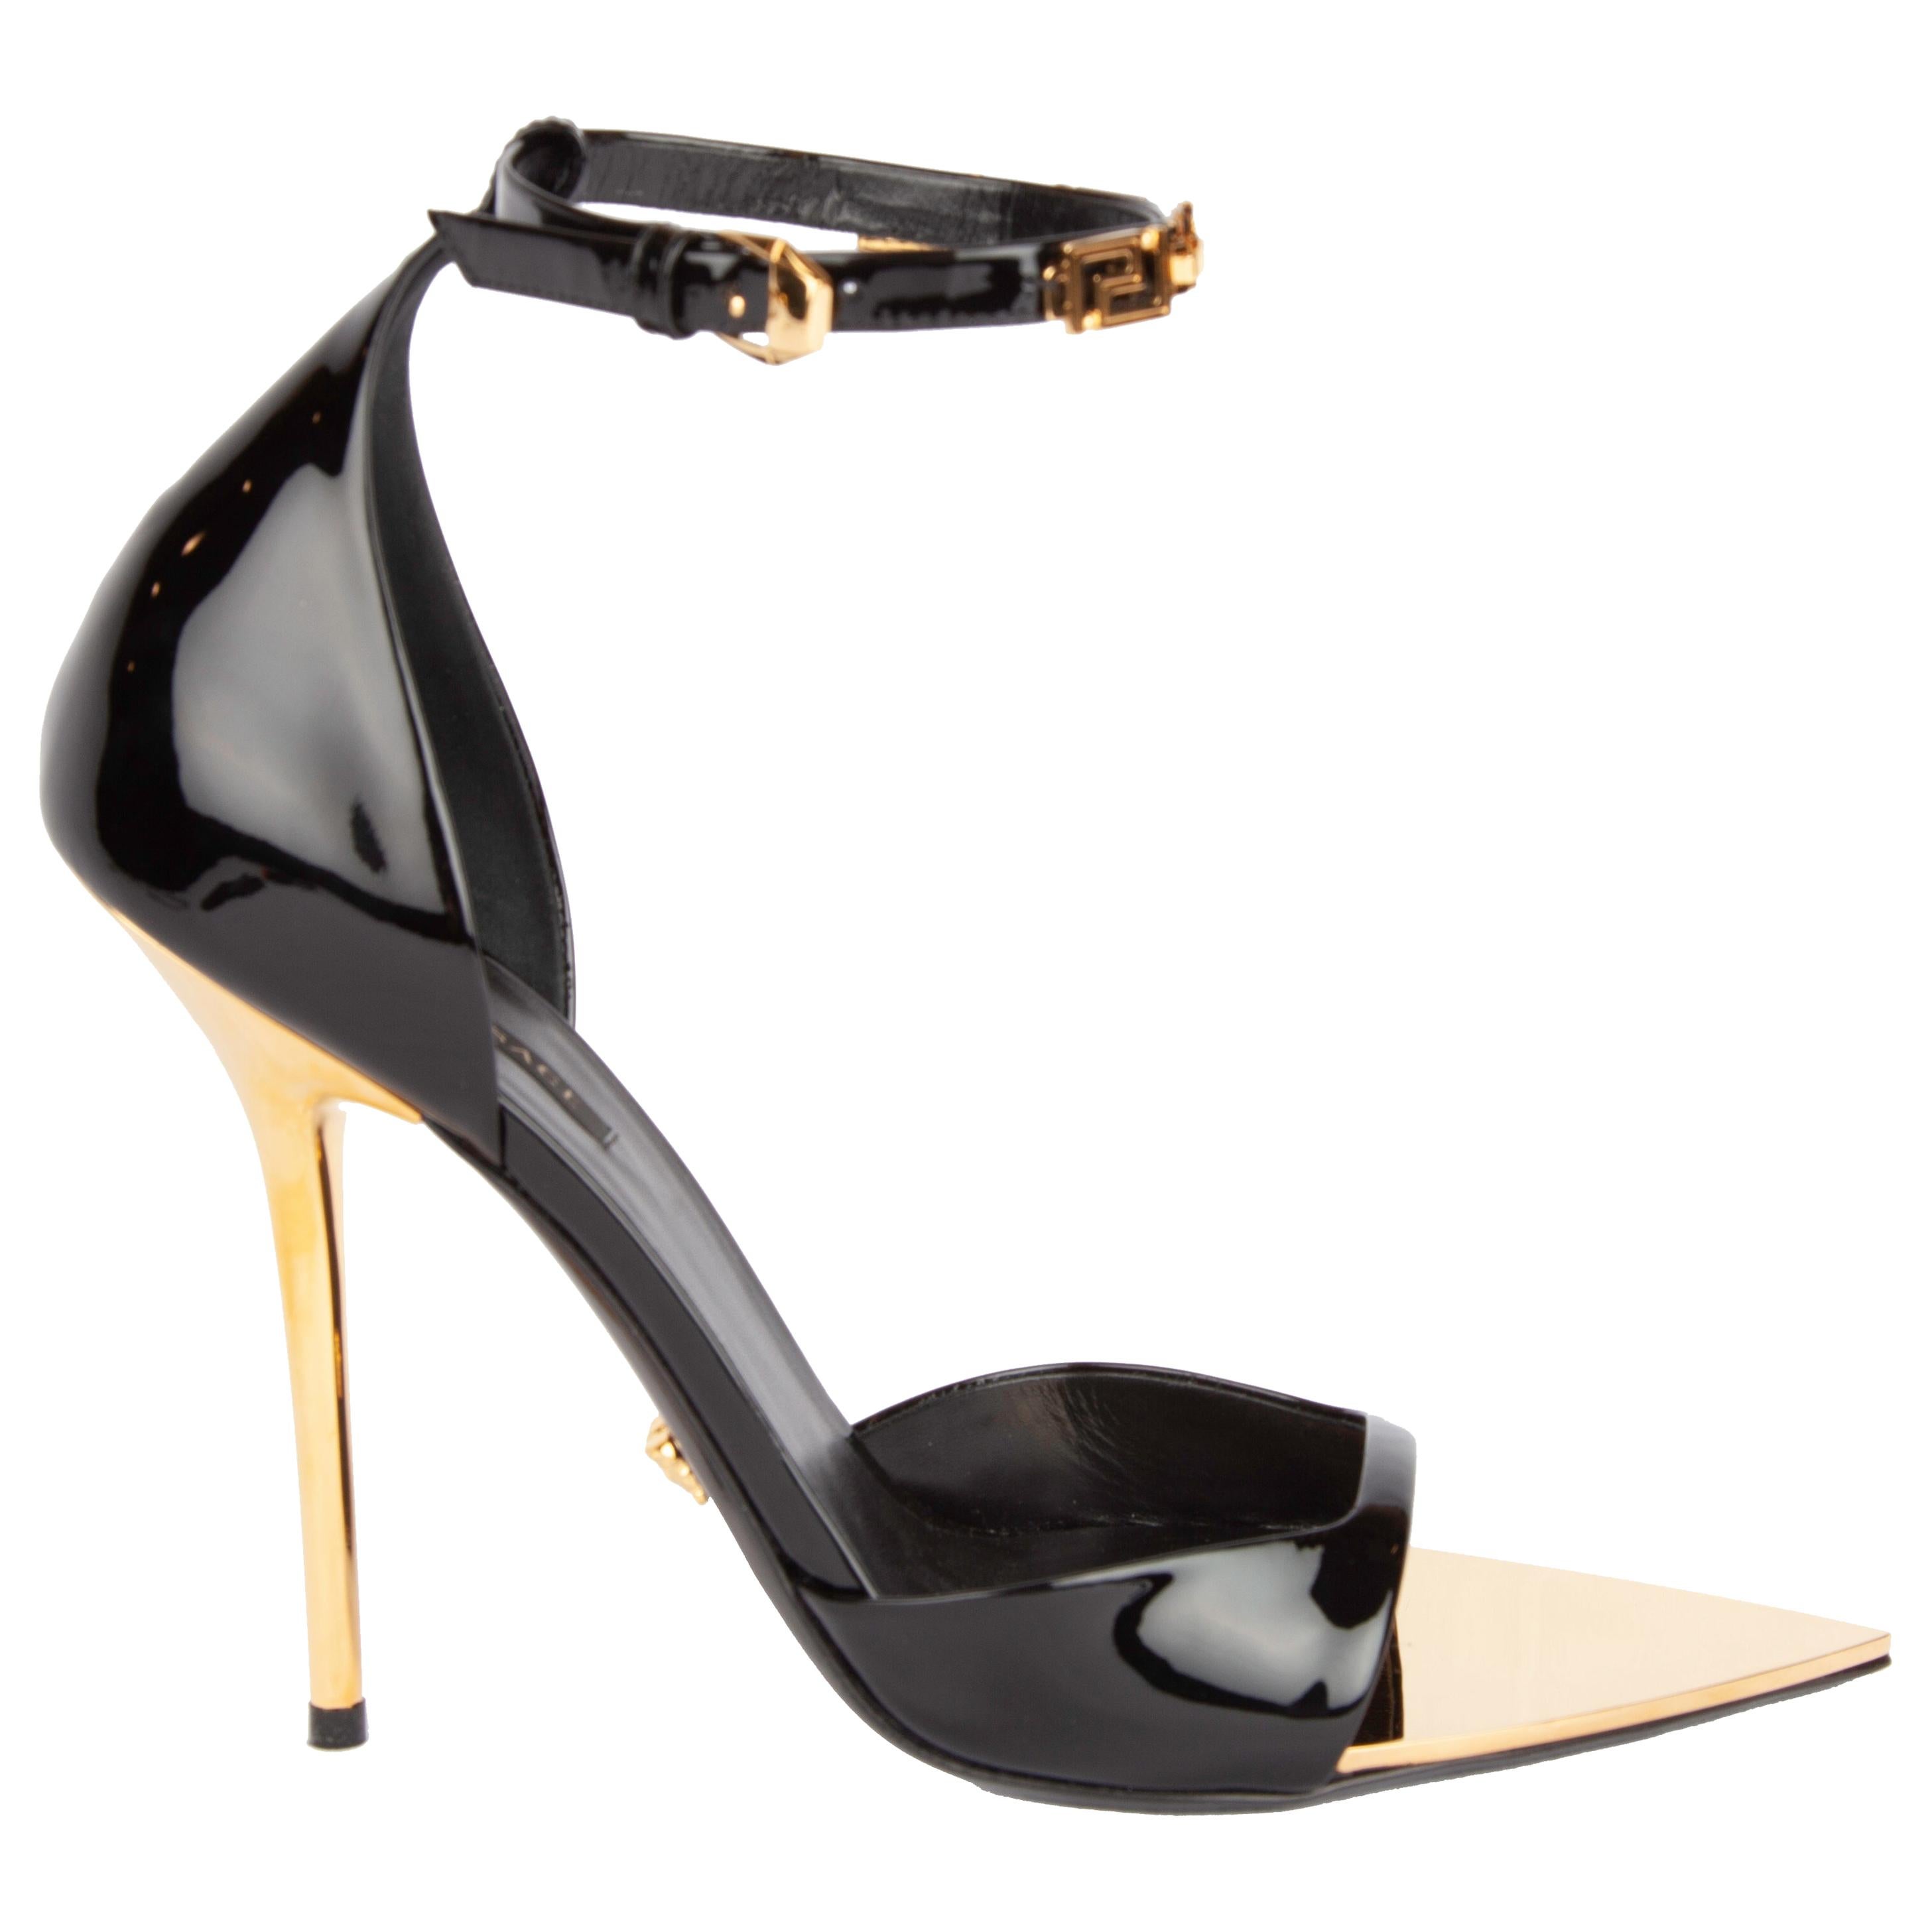 Versace Black Patent Leather Irina Strap Heels with Gold Tone Hardware Size 41